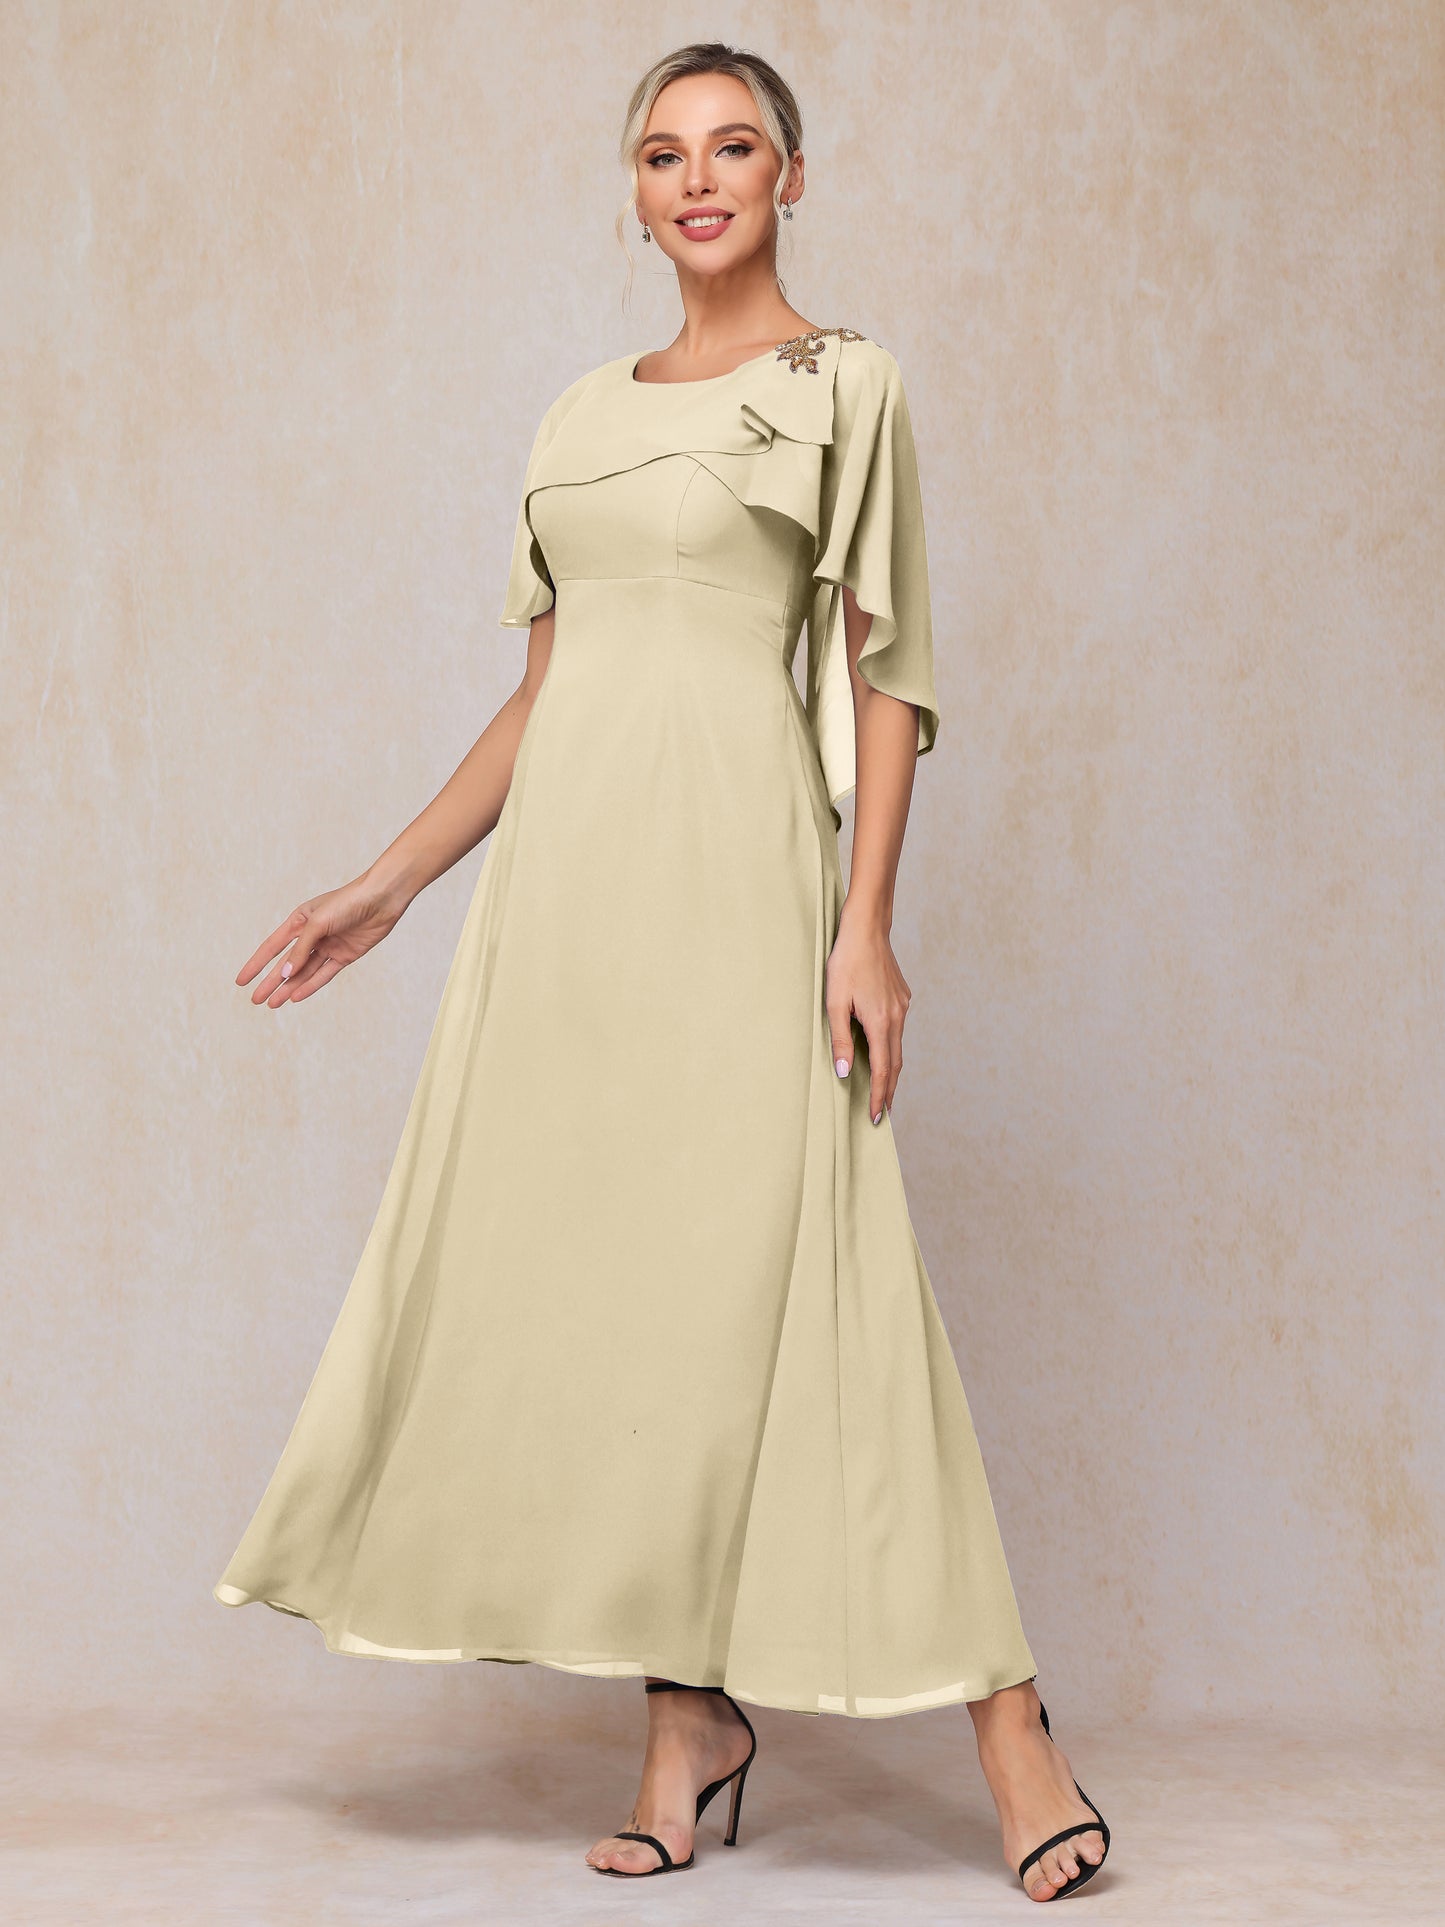 Short Sleeves Ankle Length Chiffon Mother Of The Bride Dress